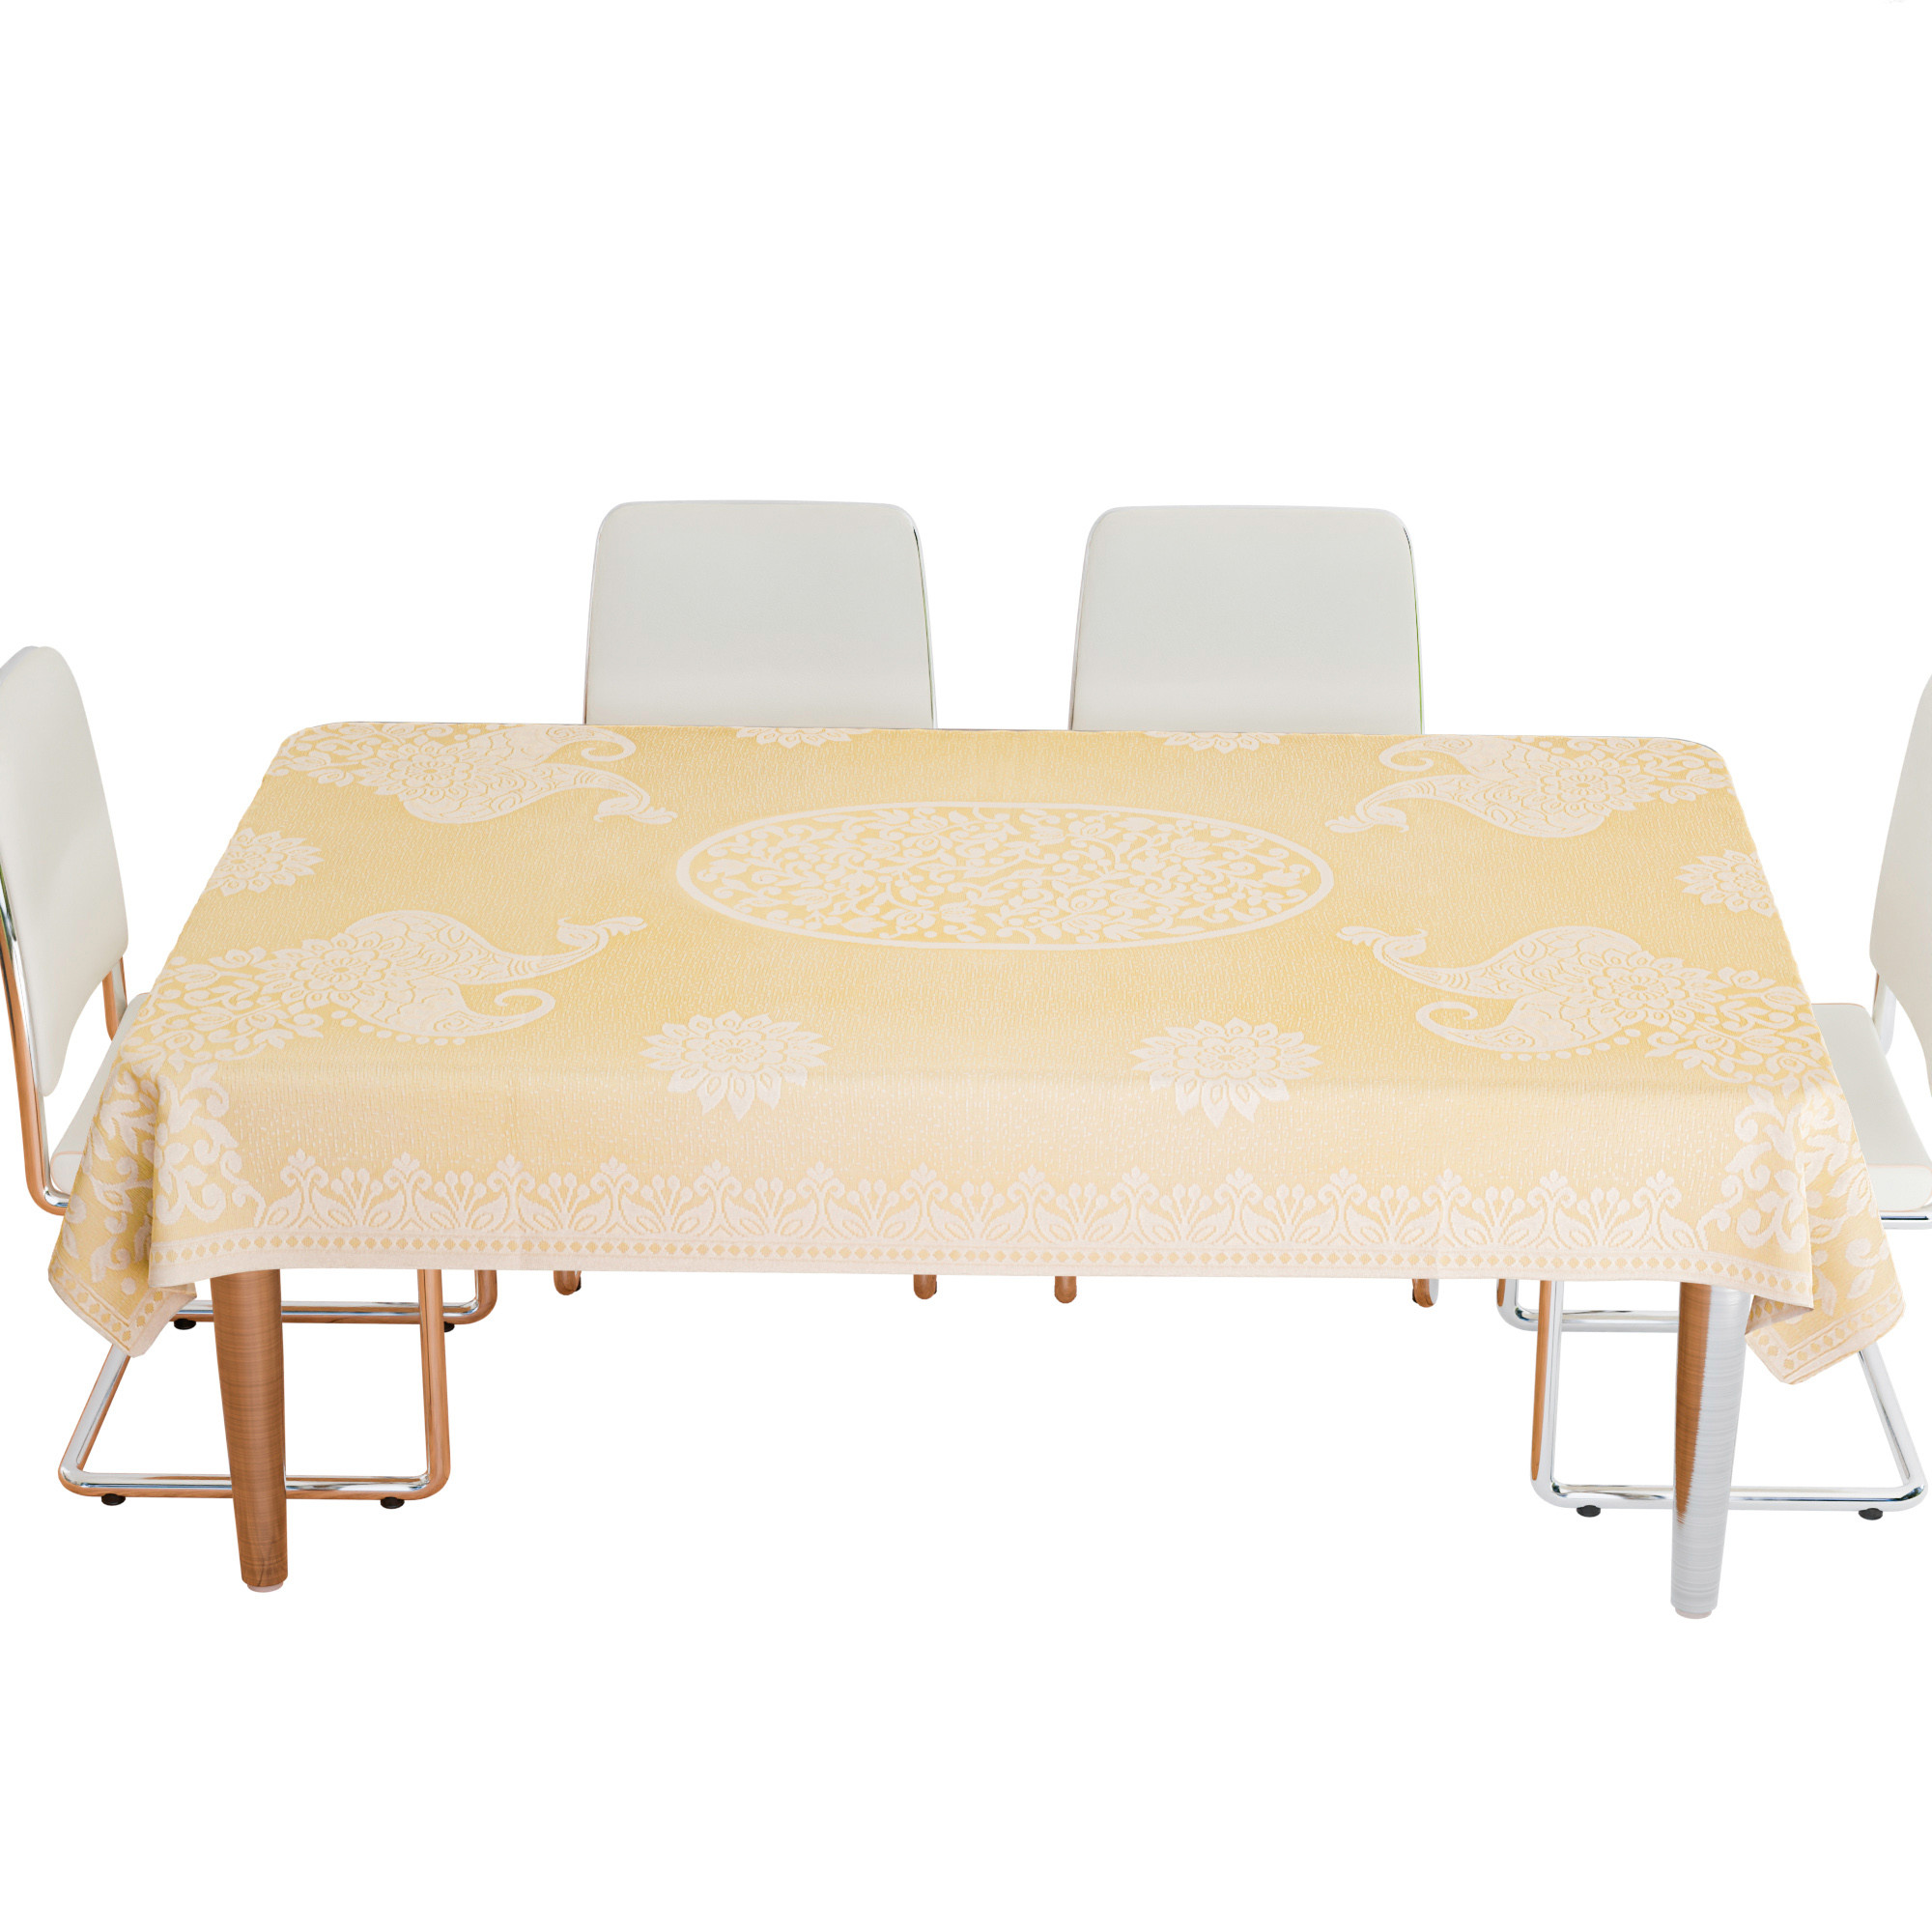 Kuber Industries Center & Dining Table Cover Set | Center & Dining Table Combo Set | Table Cover for Dining & Center | Table Protector Cover | Peacock Table Cover | Cream